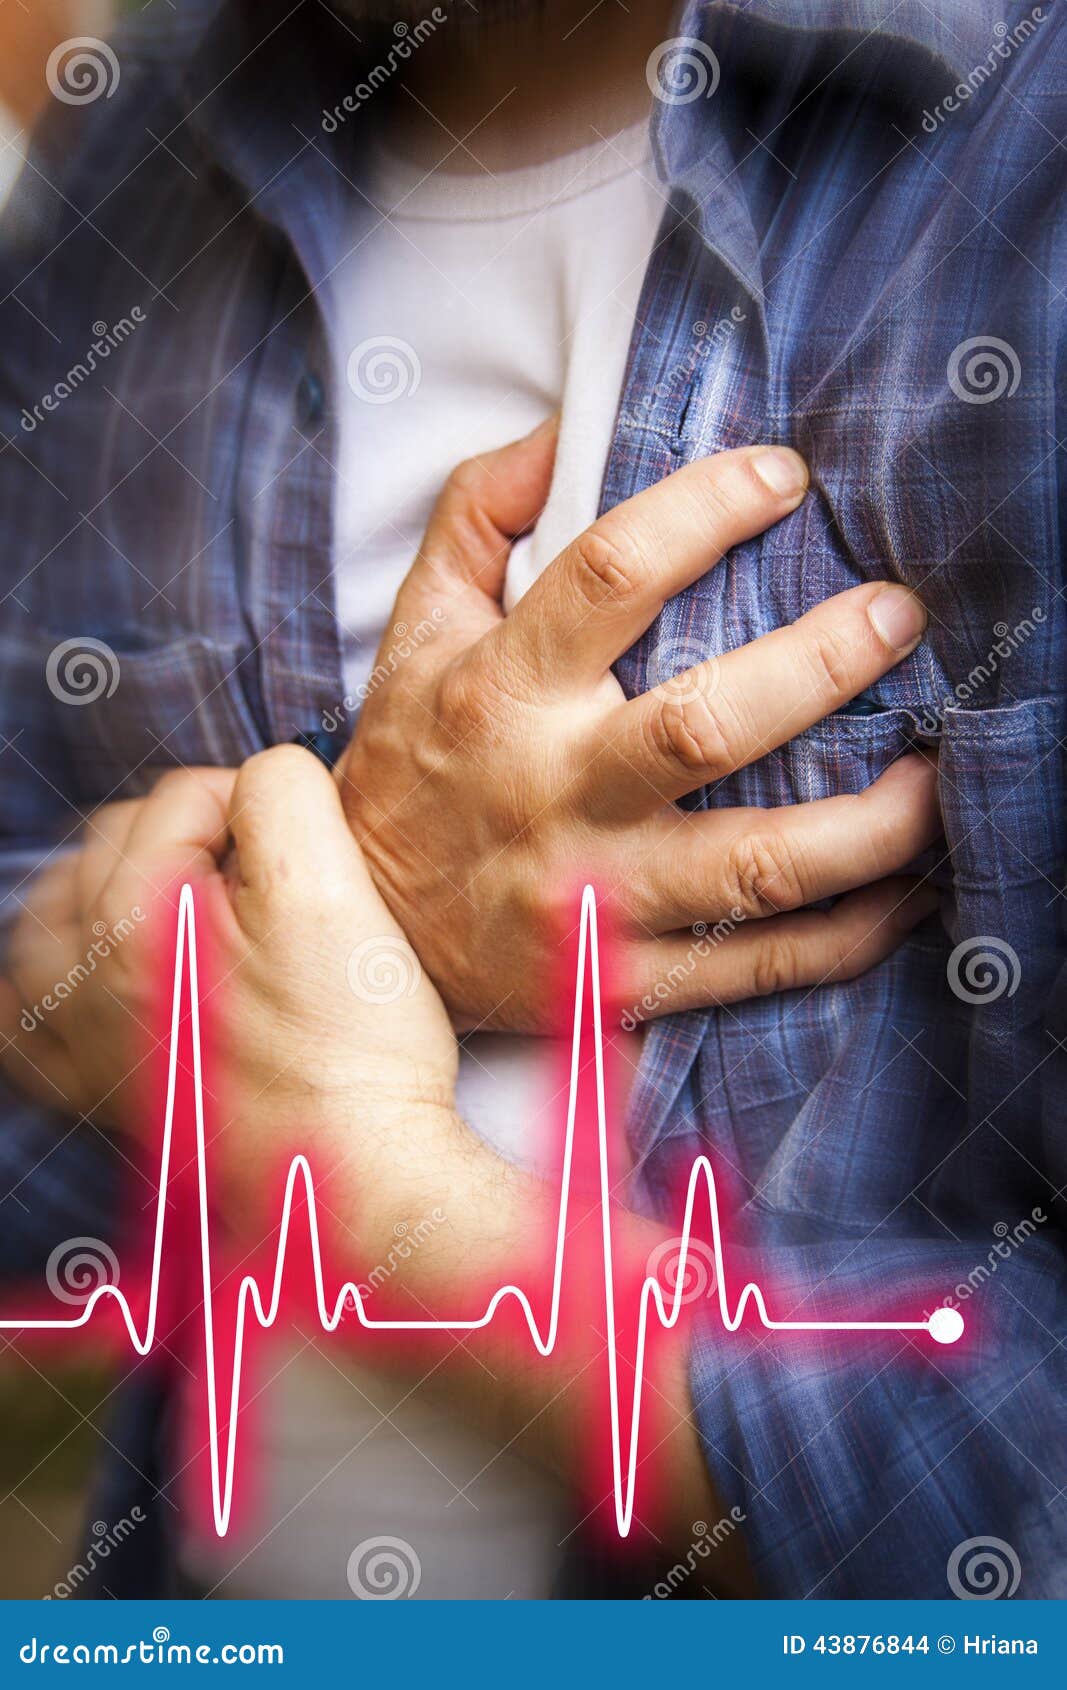 men with chest pain - heart attack